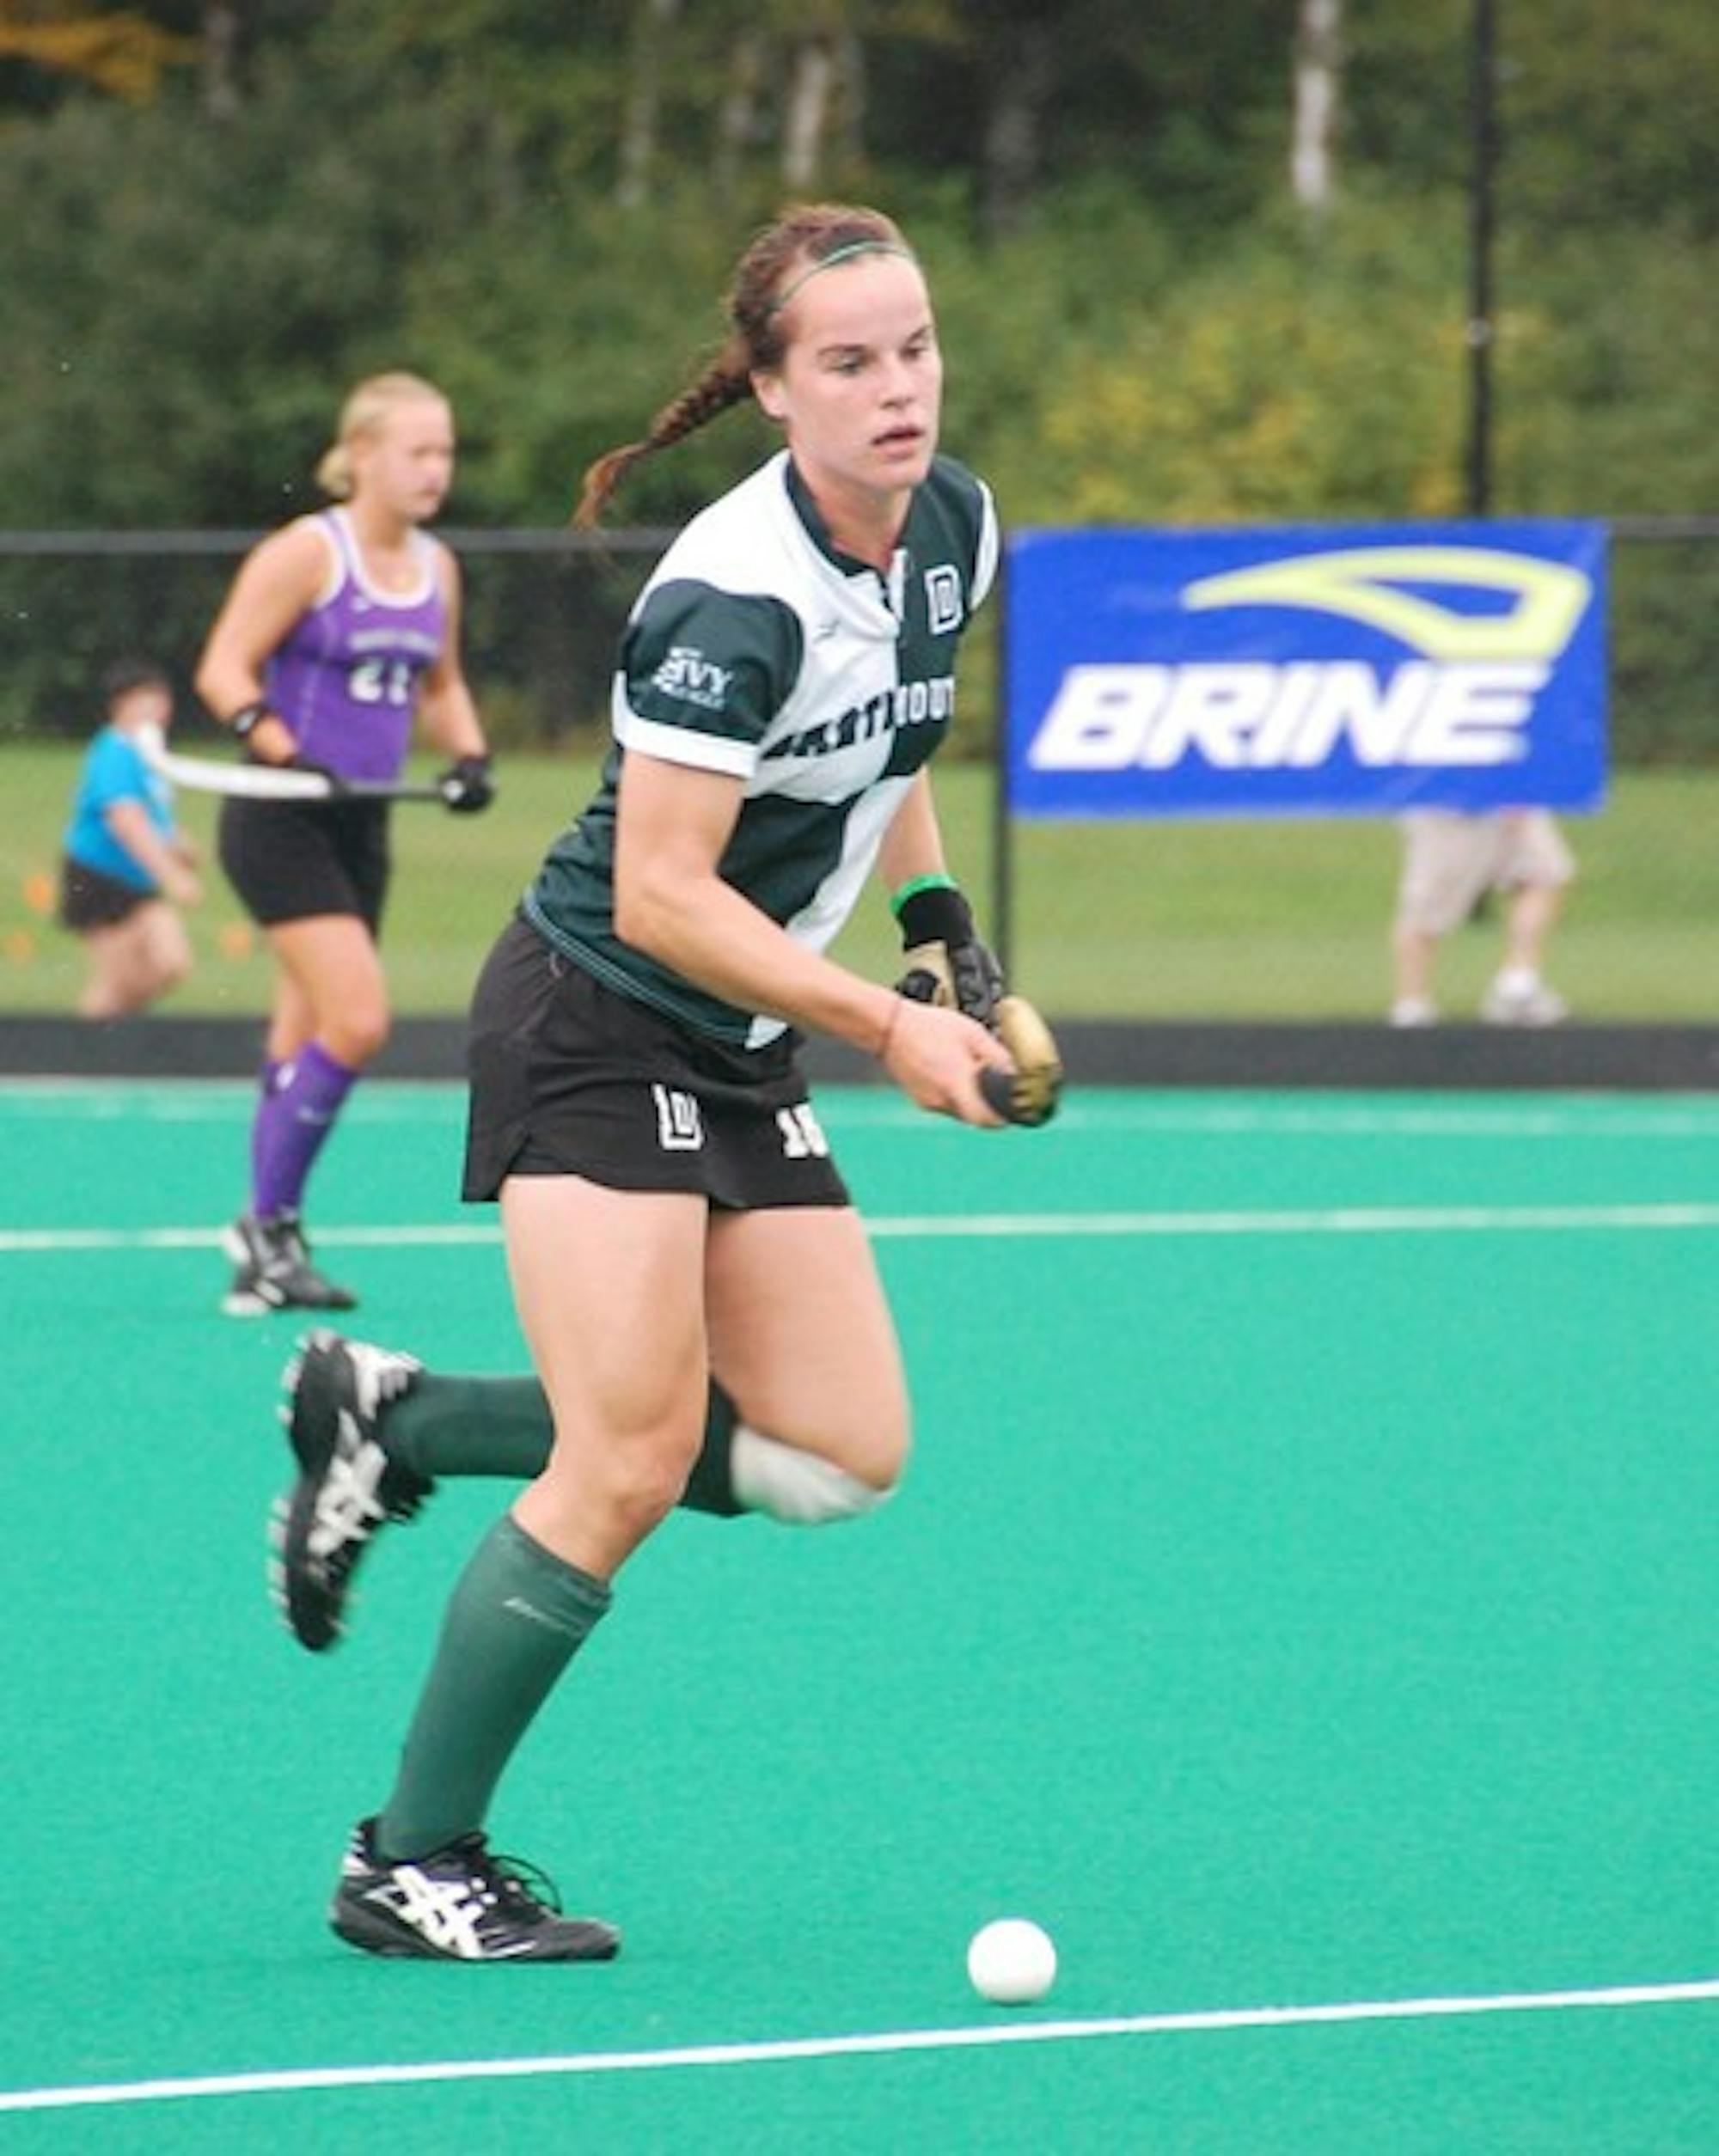 Captain Ashley Hines '09 provided the assist on the game-winning, overtime goal in the Big Green's 5-4 victory over Brown Saturday in Hanover.